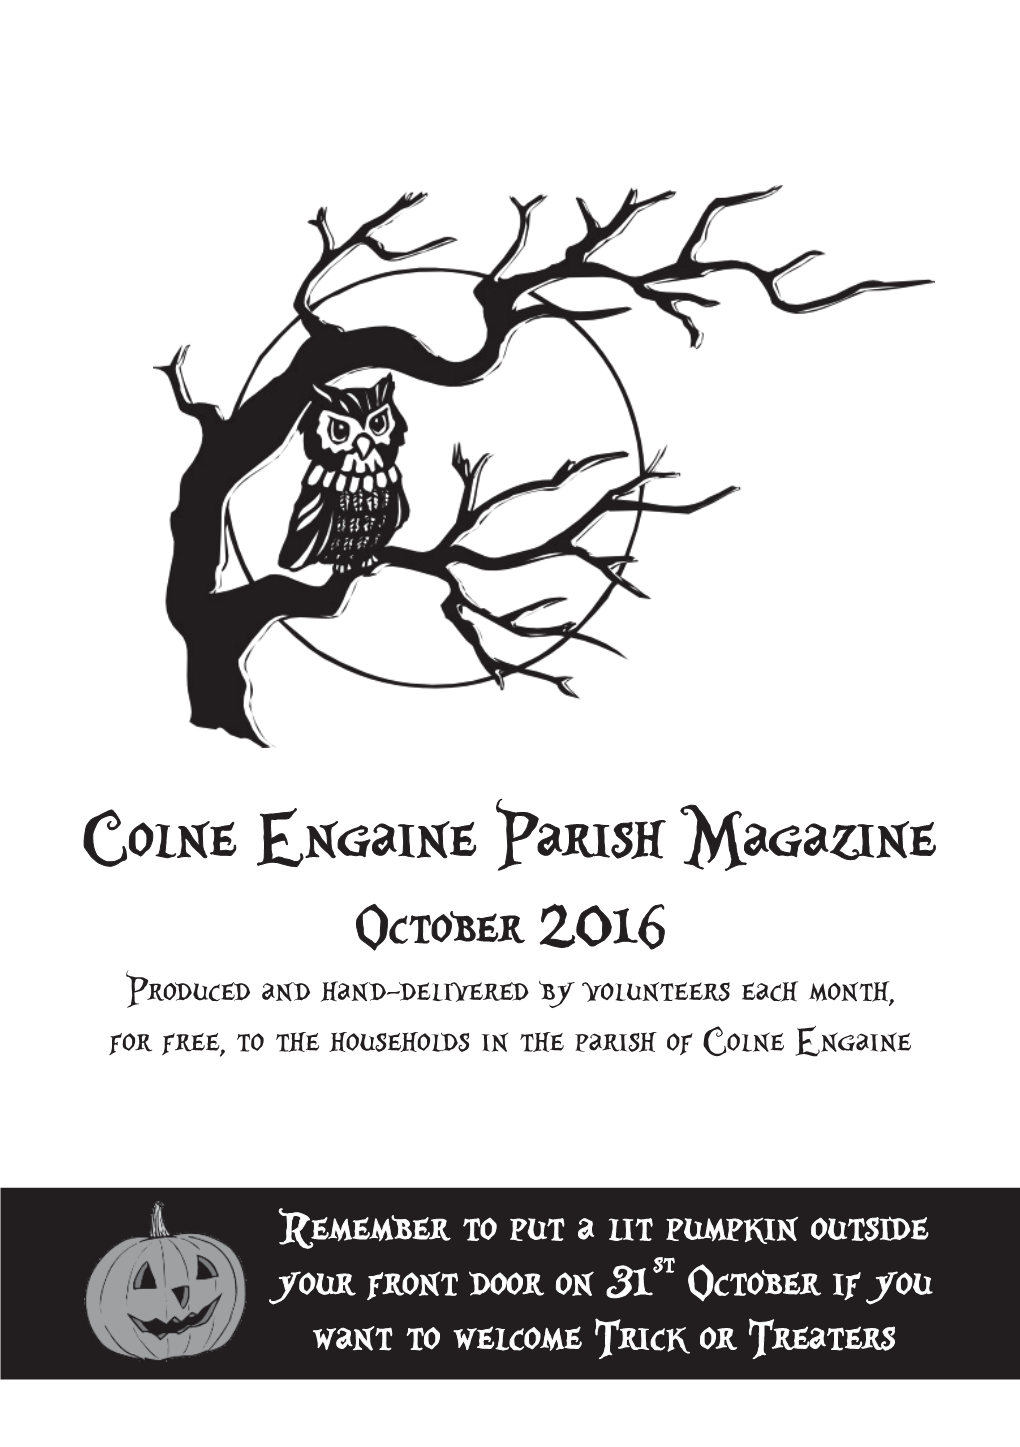 Colne Engaine Parish Magazine October 2016 Produced and Hand-Delivered by Volunteers Each Month